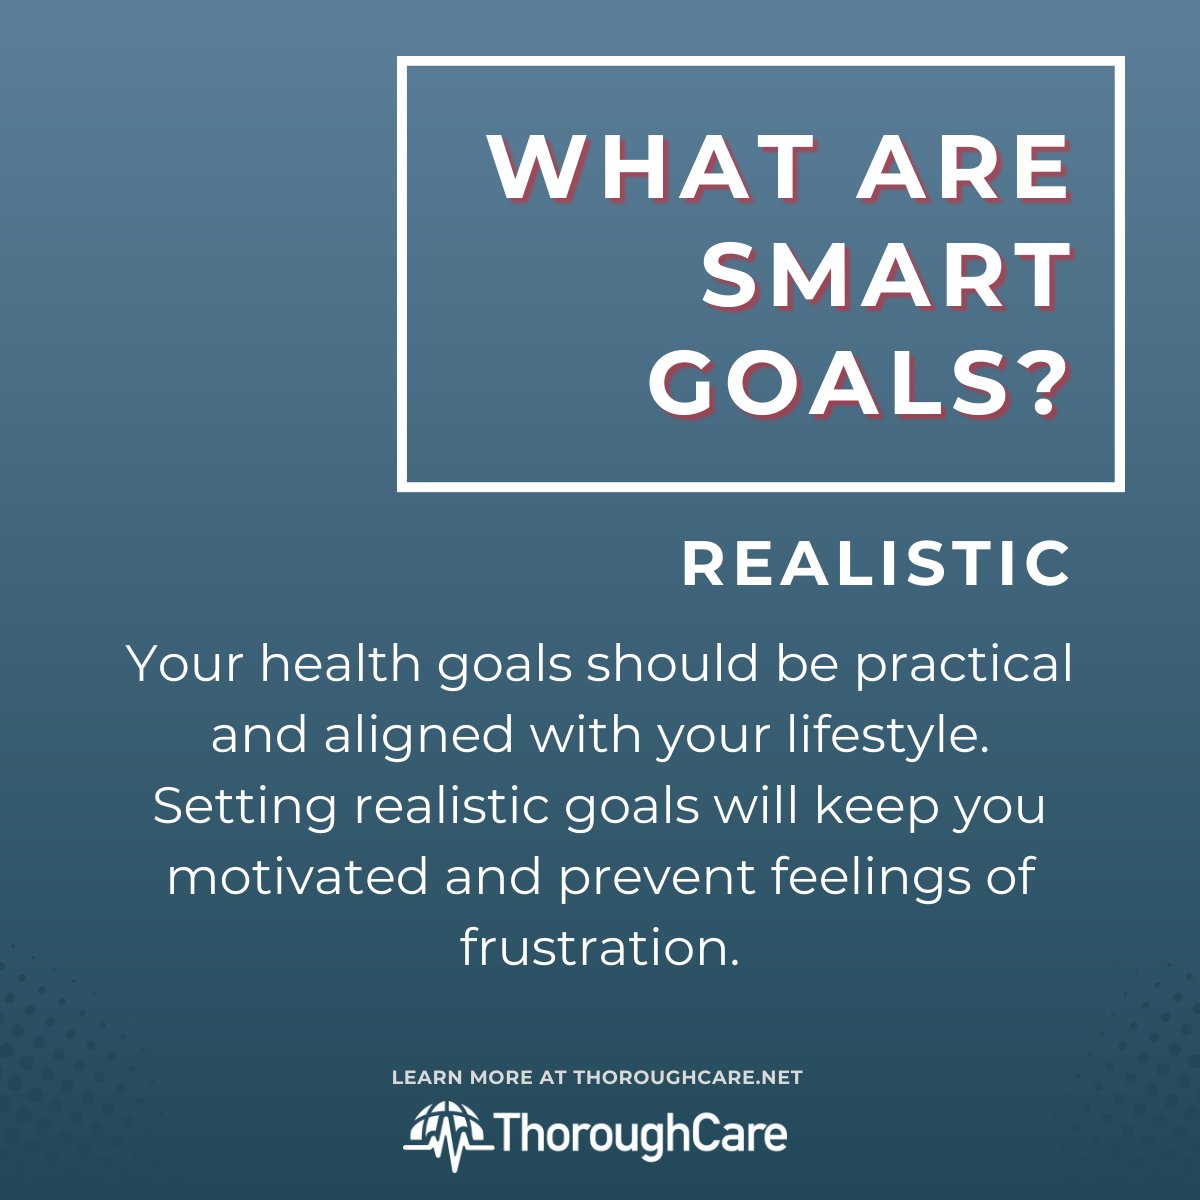 #SMARTGoals #4- Realistic
Setting health goals that align with your abilities and lifestyle can help foster continued commitment and results. Stay tuned for goal #5! hubs.li/Q021rF0Q0 #CareManager #CareCoordination #HealthTech #ValueBasedCare